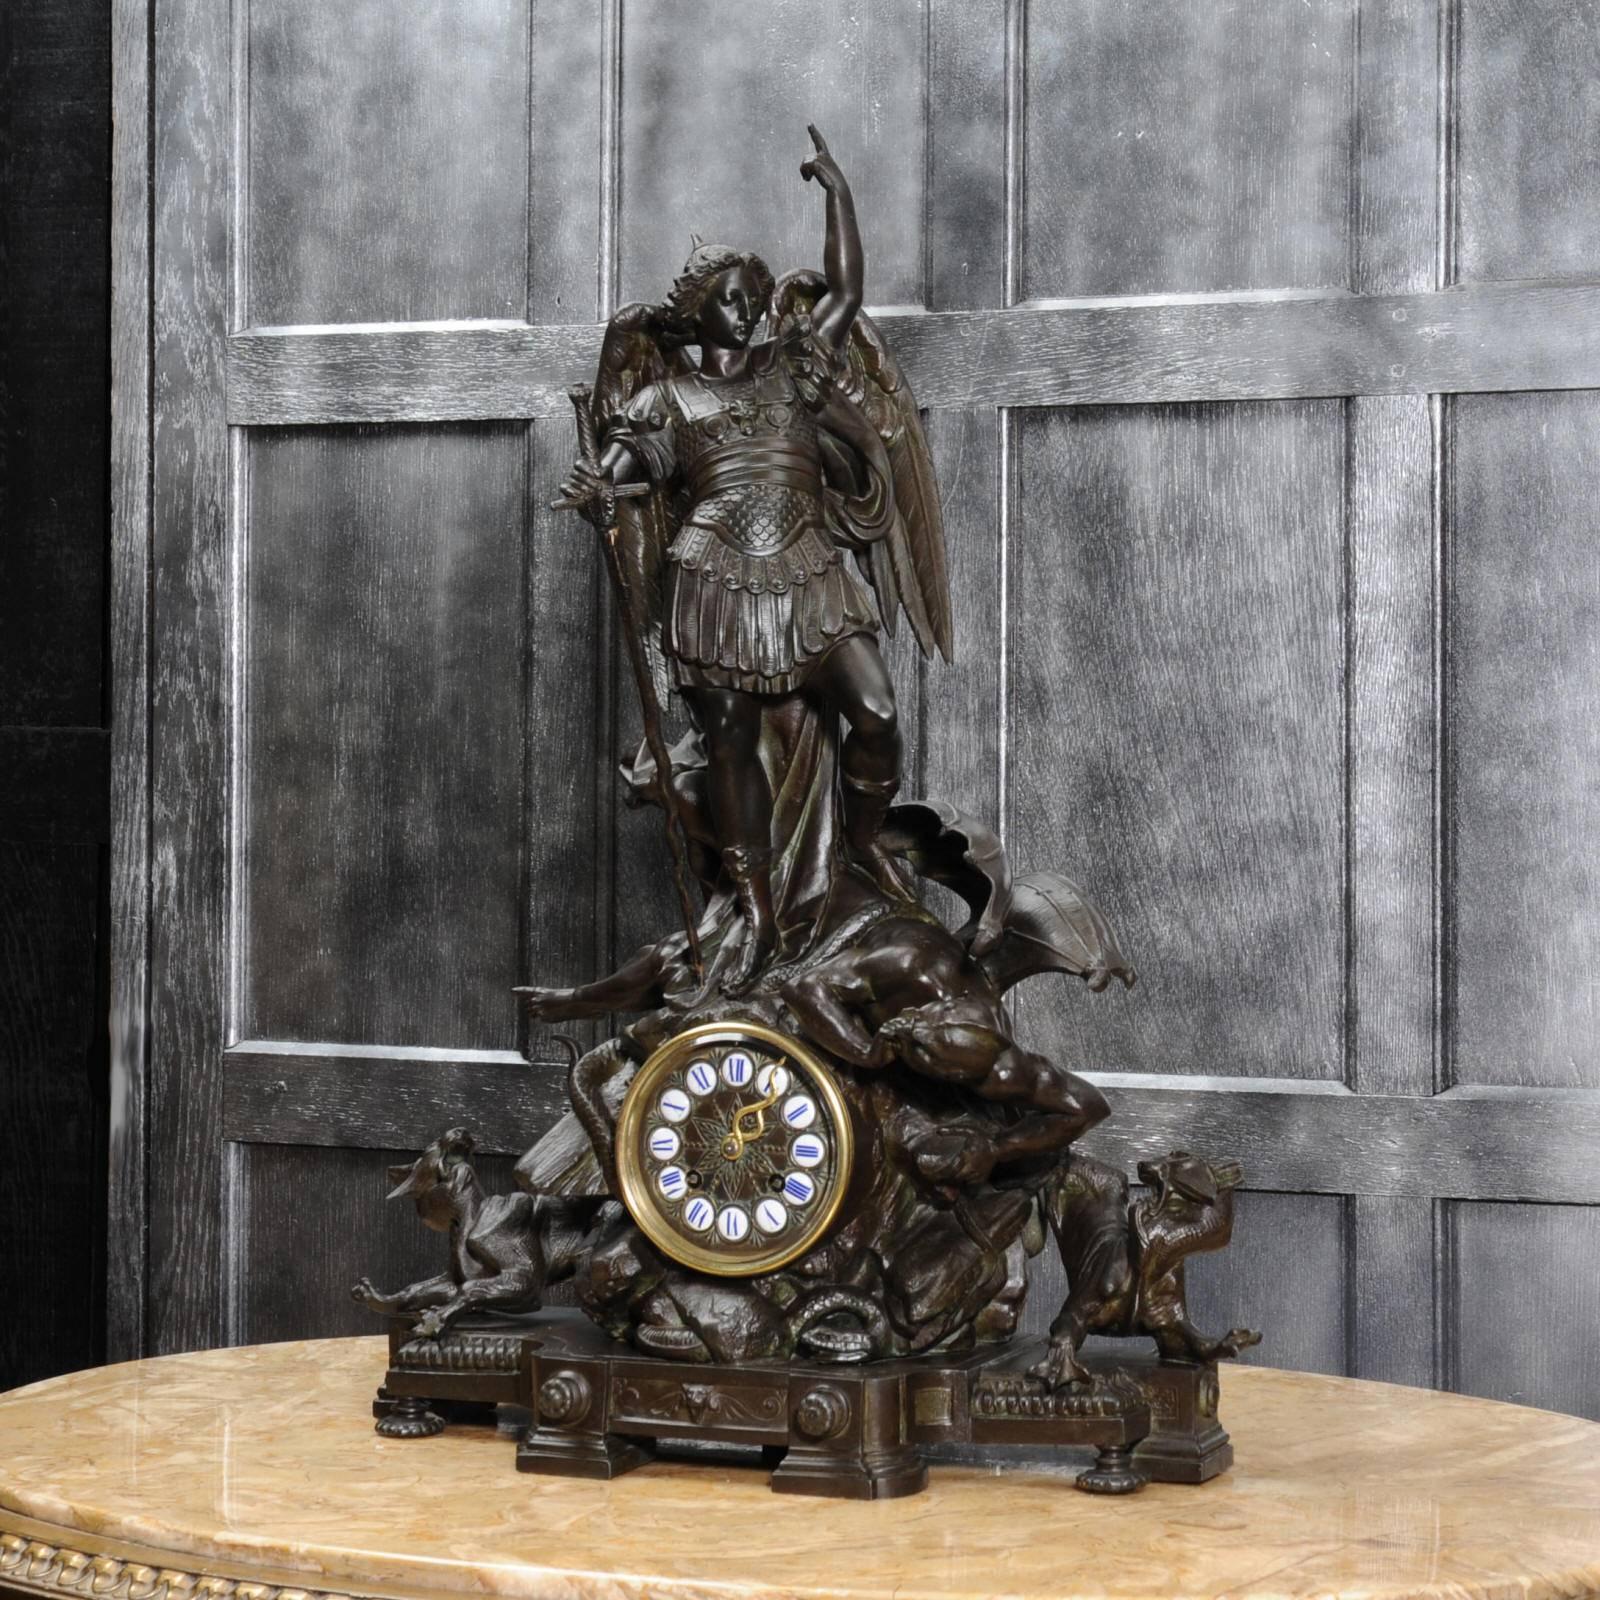 A rare and superb sculptural clock depicting St Michael Slaying the Devil. Exquisitely modelled in bronze patinated white metal, it shows St Michael standing triumphantly above the slain Satan, hounds baying to each side. A snake entwined around his